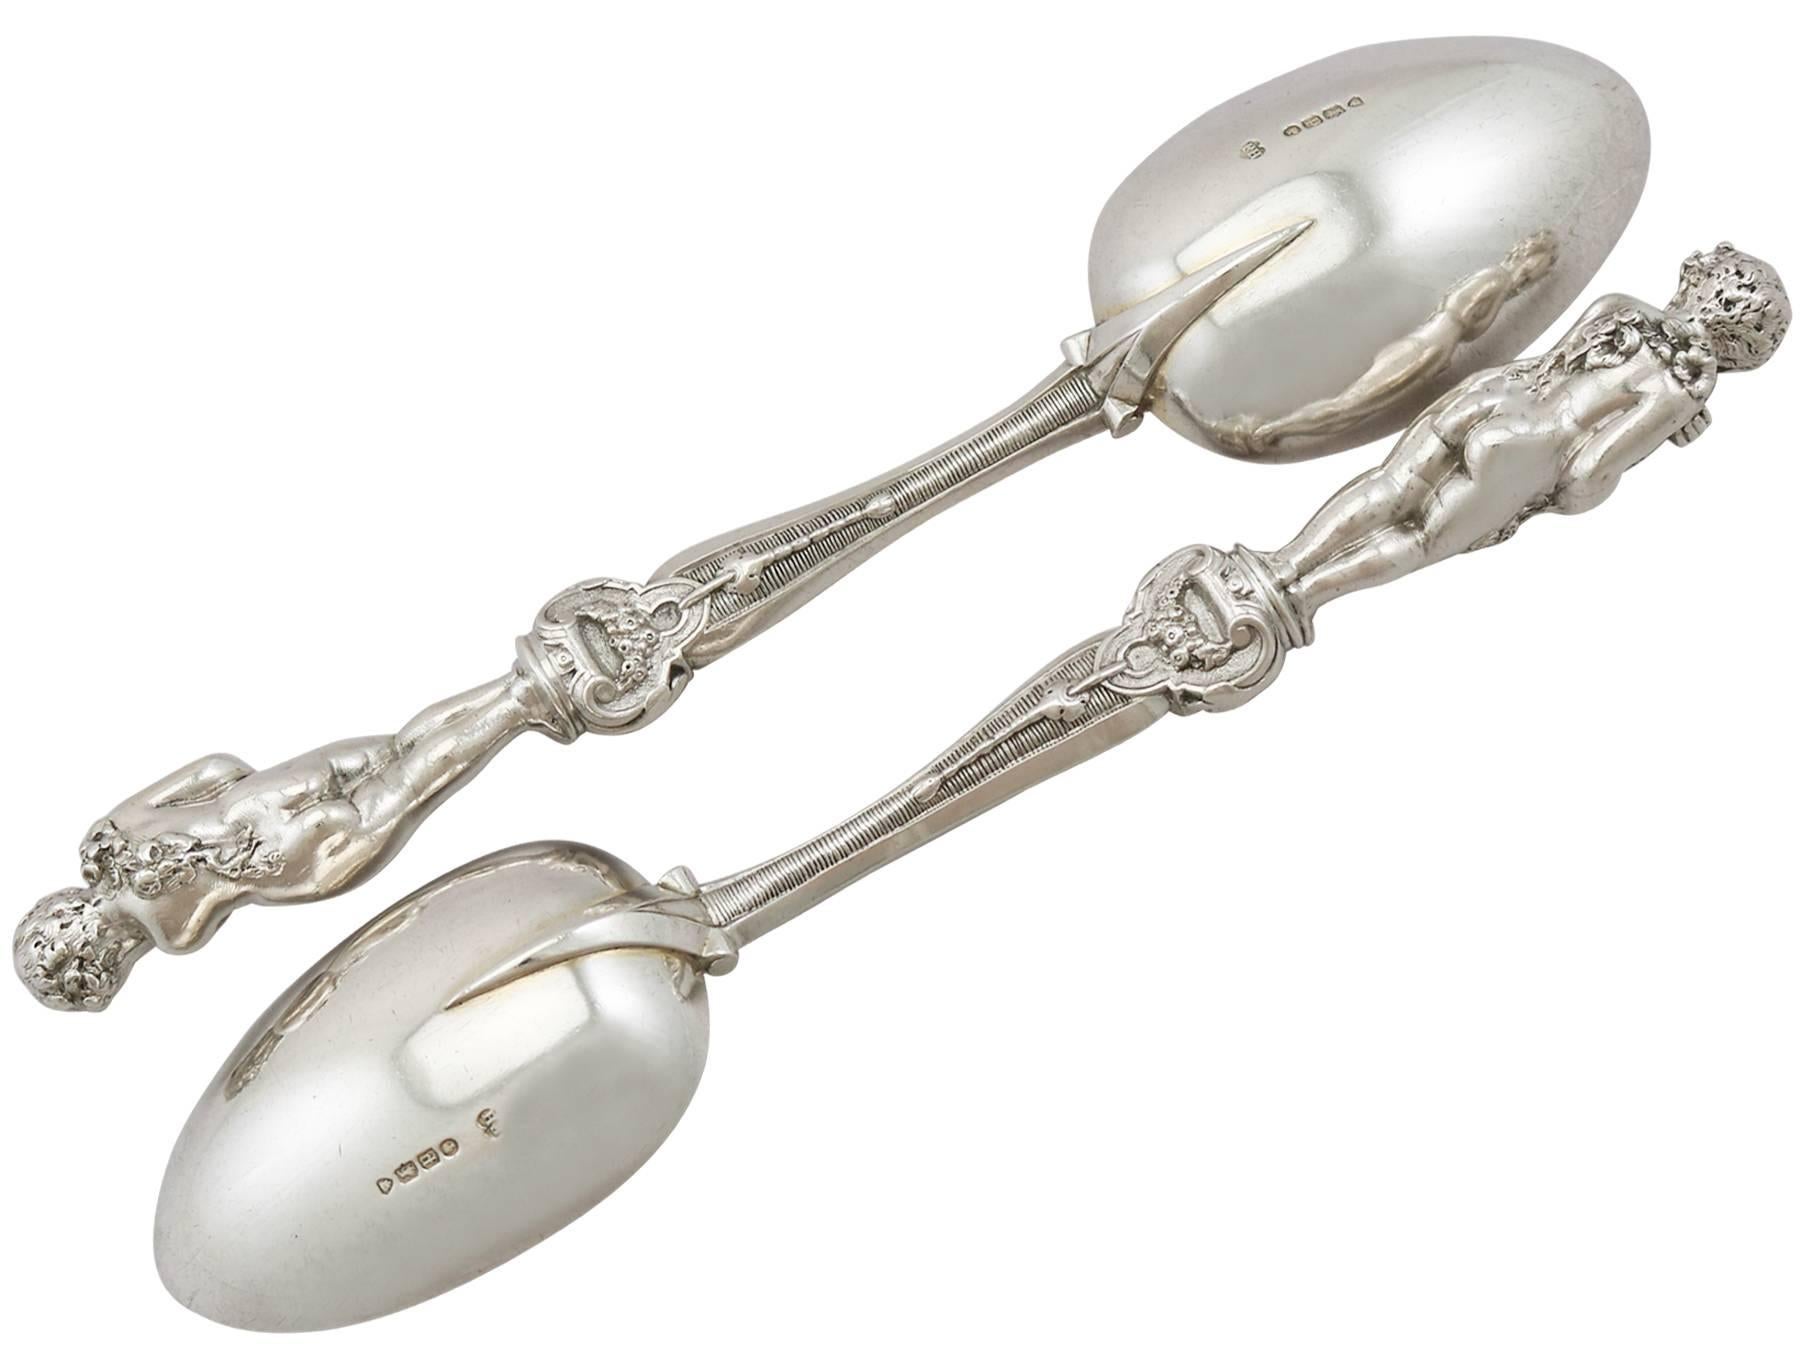 An exceptional, fine and impressive pair of antique Victorian English sterling silver serving spoons made by Francis Higgins II; an addition to our silver flatware collection

These exceptional antique Victorian English cast sterling silver